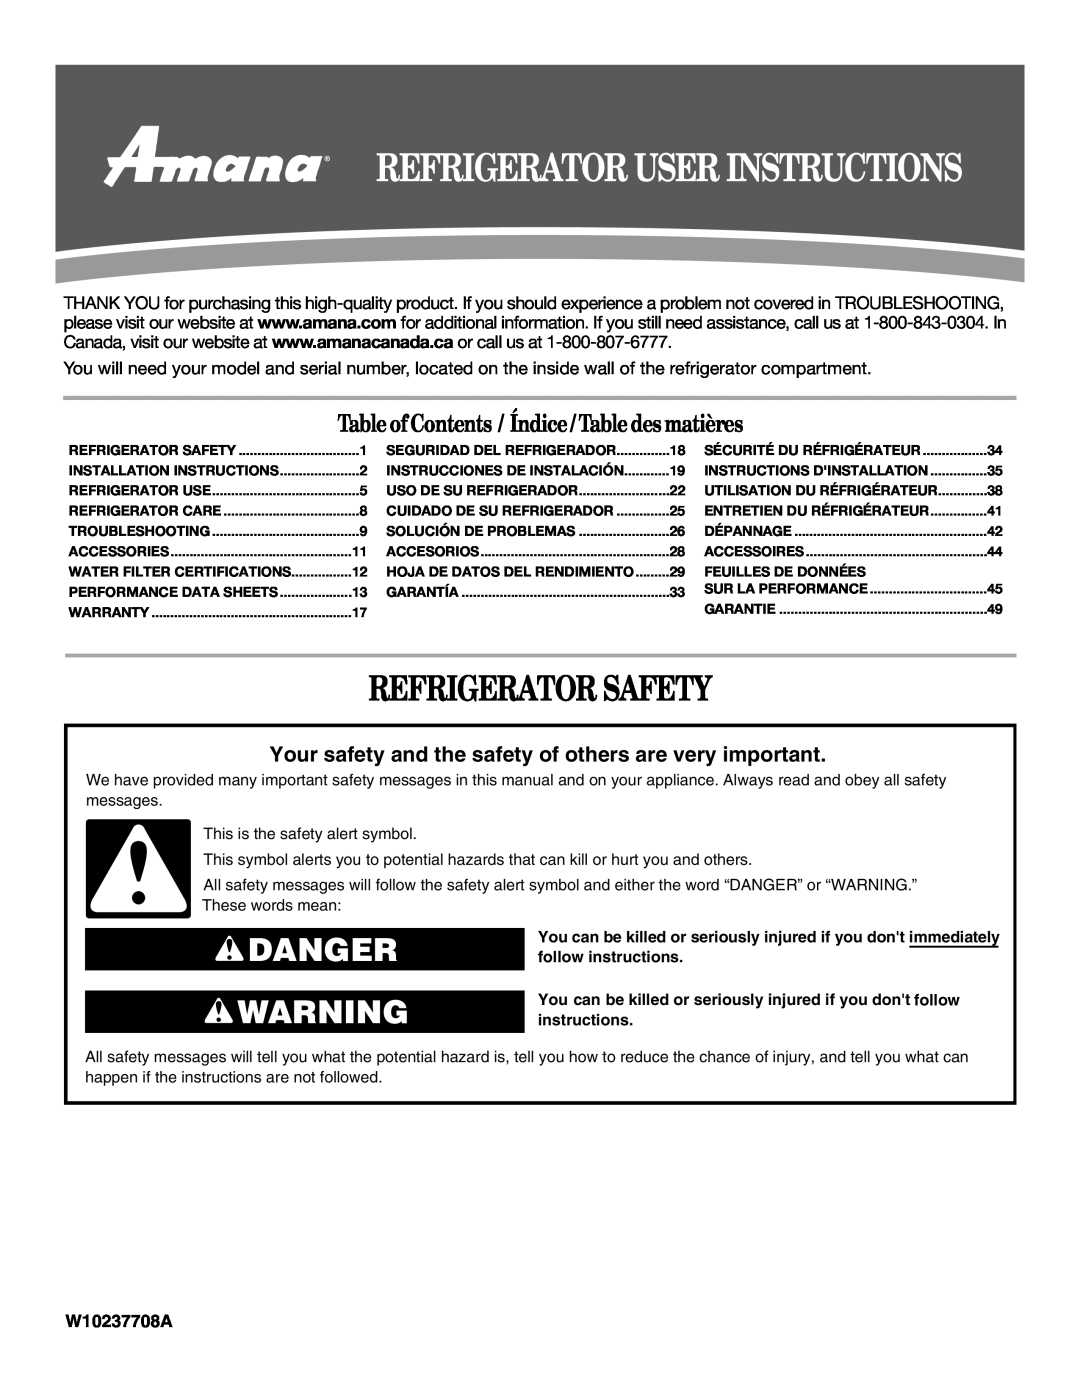 Amana W10237701A installation instructions Refrigerator Safety, Danger, Table ofContents / Índice / Table des matières 